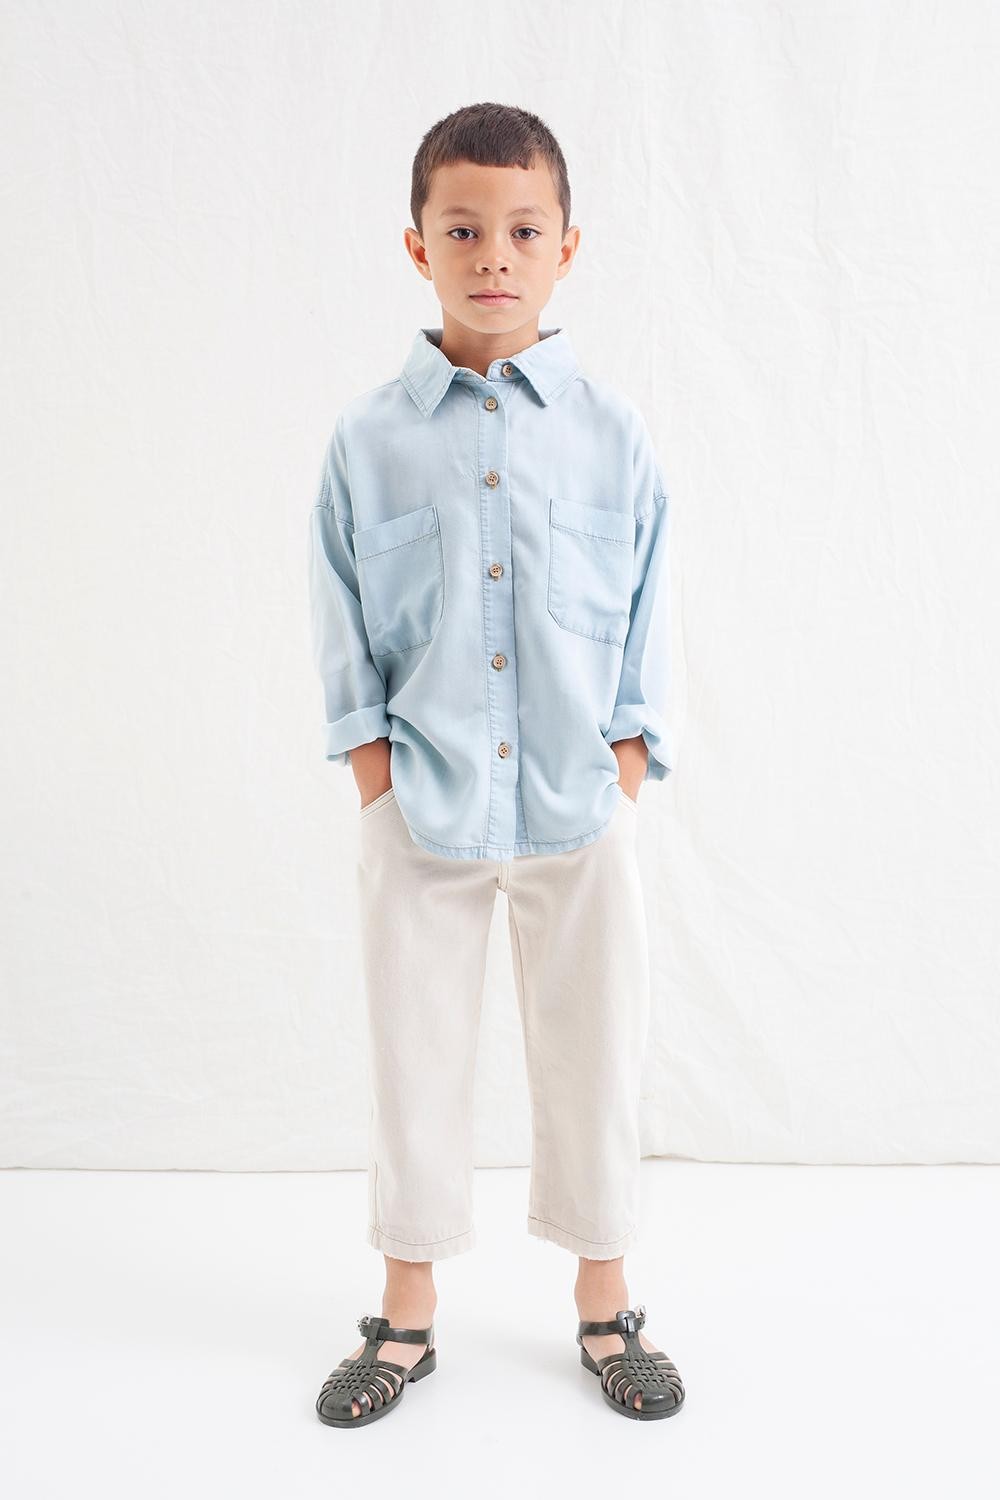 KID LONG SLEEVE SHIRT WITH SHIRT COLLAR WITH POCKETS